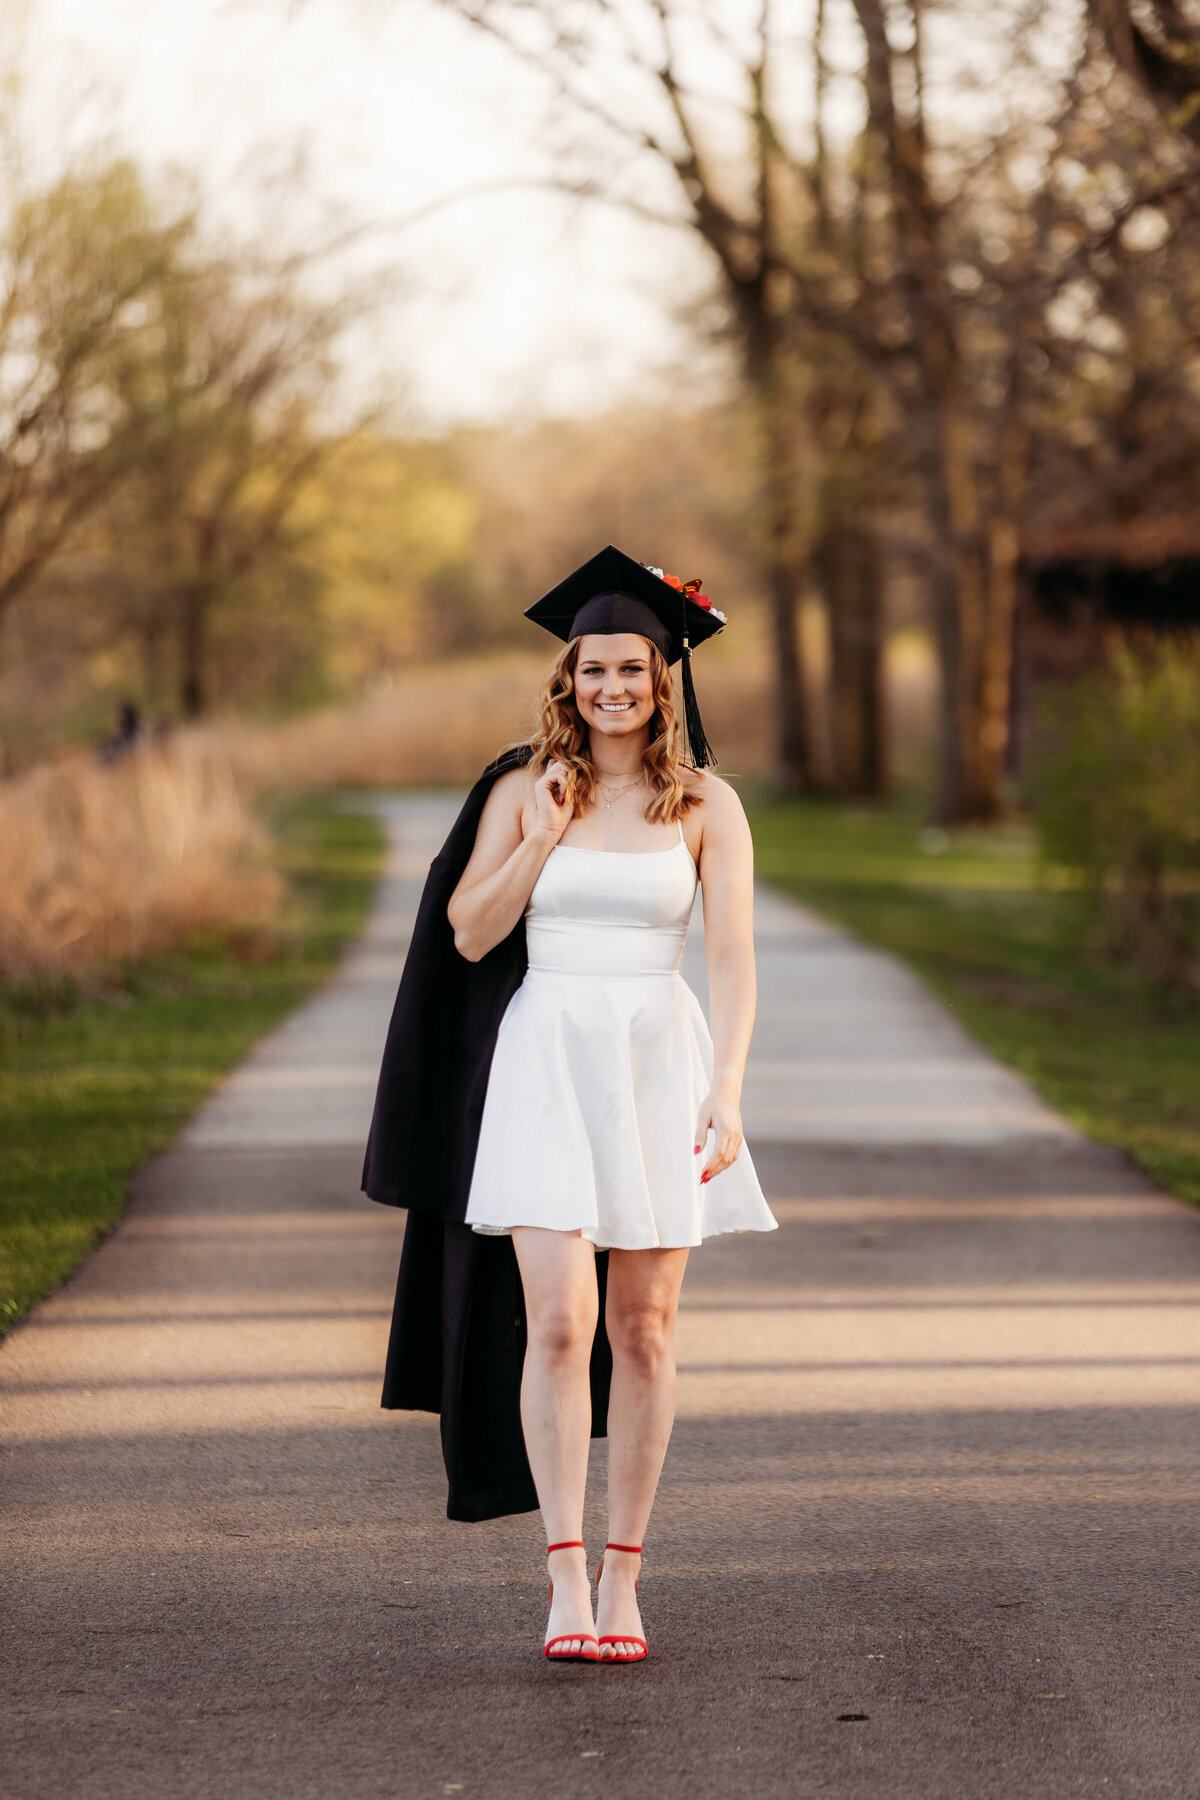 A graduate walks down a path with her cap and gown.